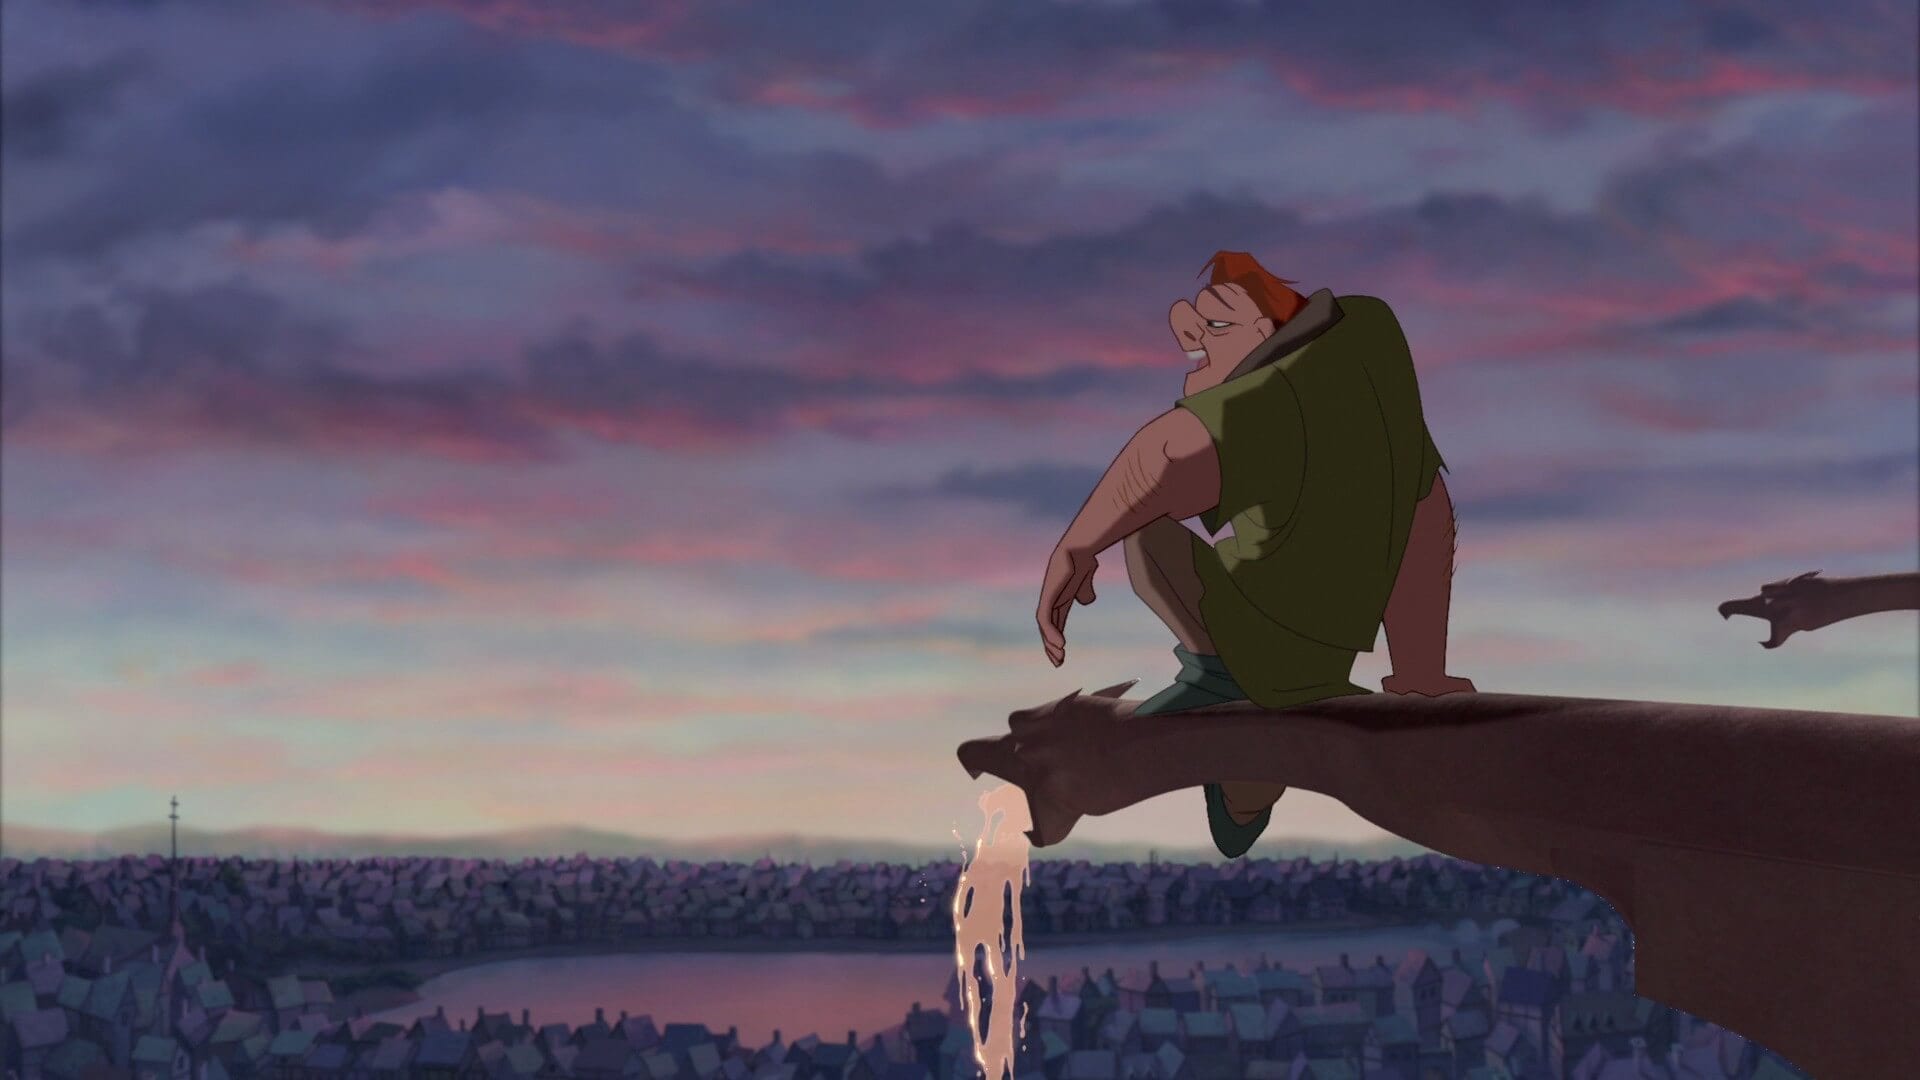 A Study in Disney: ‘The Hunchback of Notre Dame’ (1996)